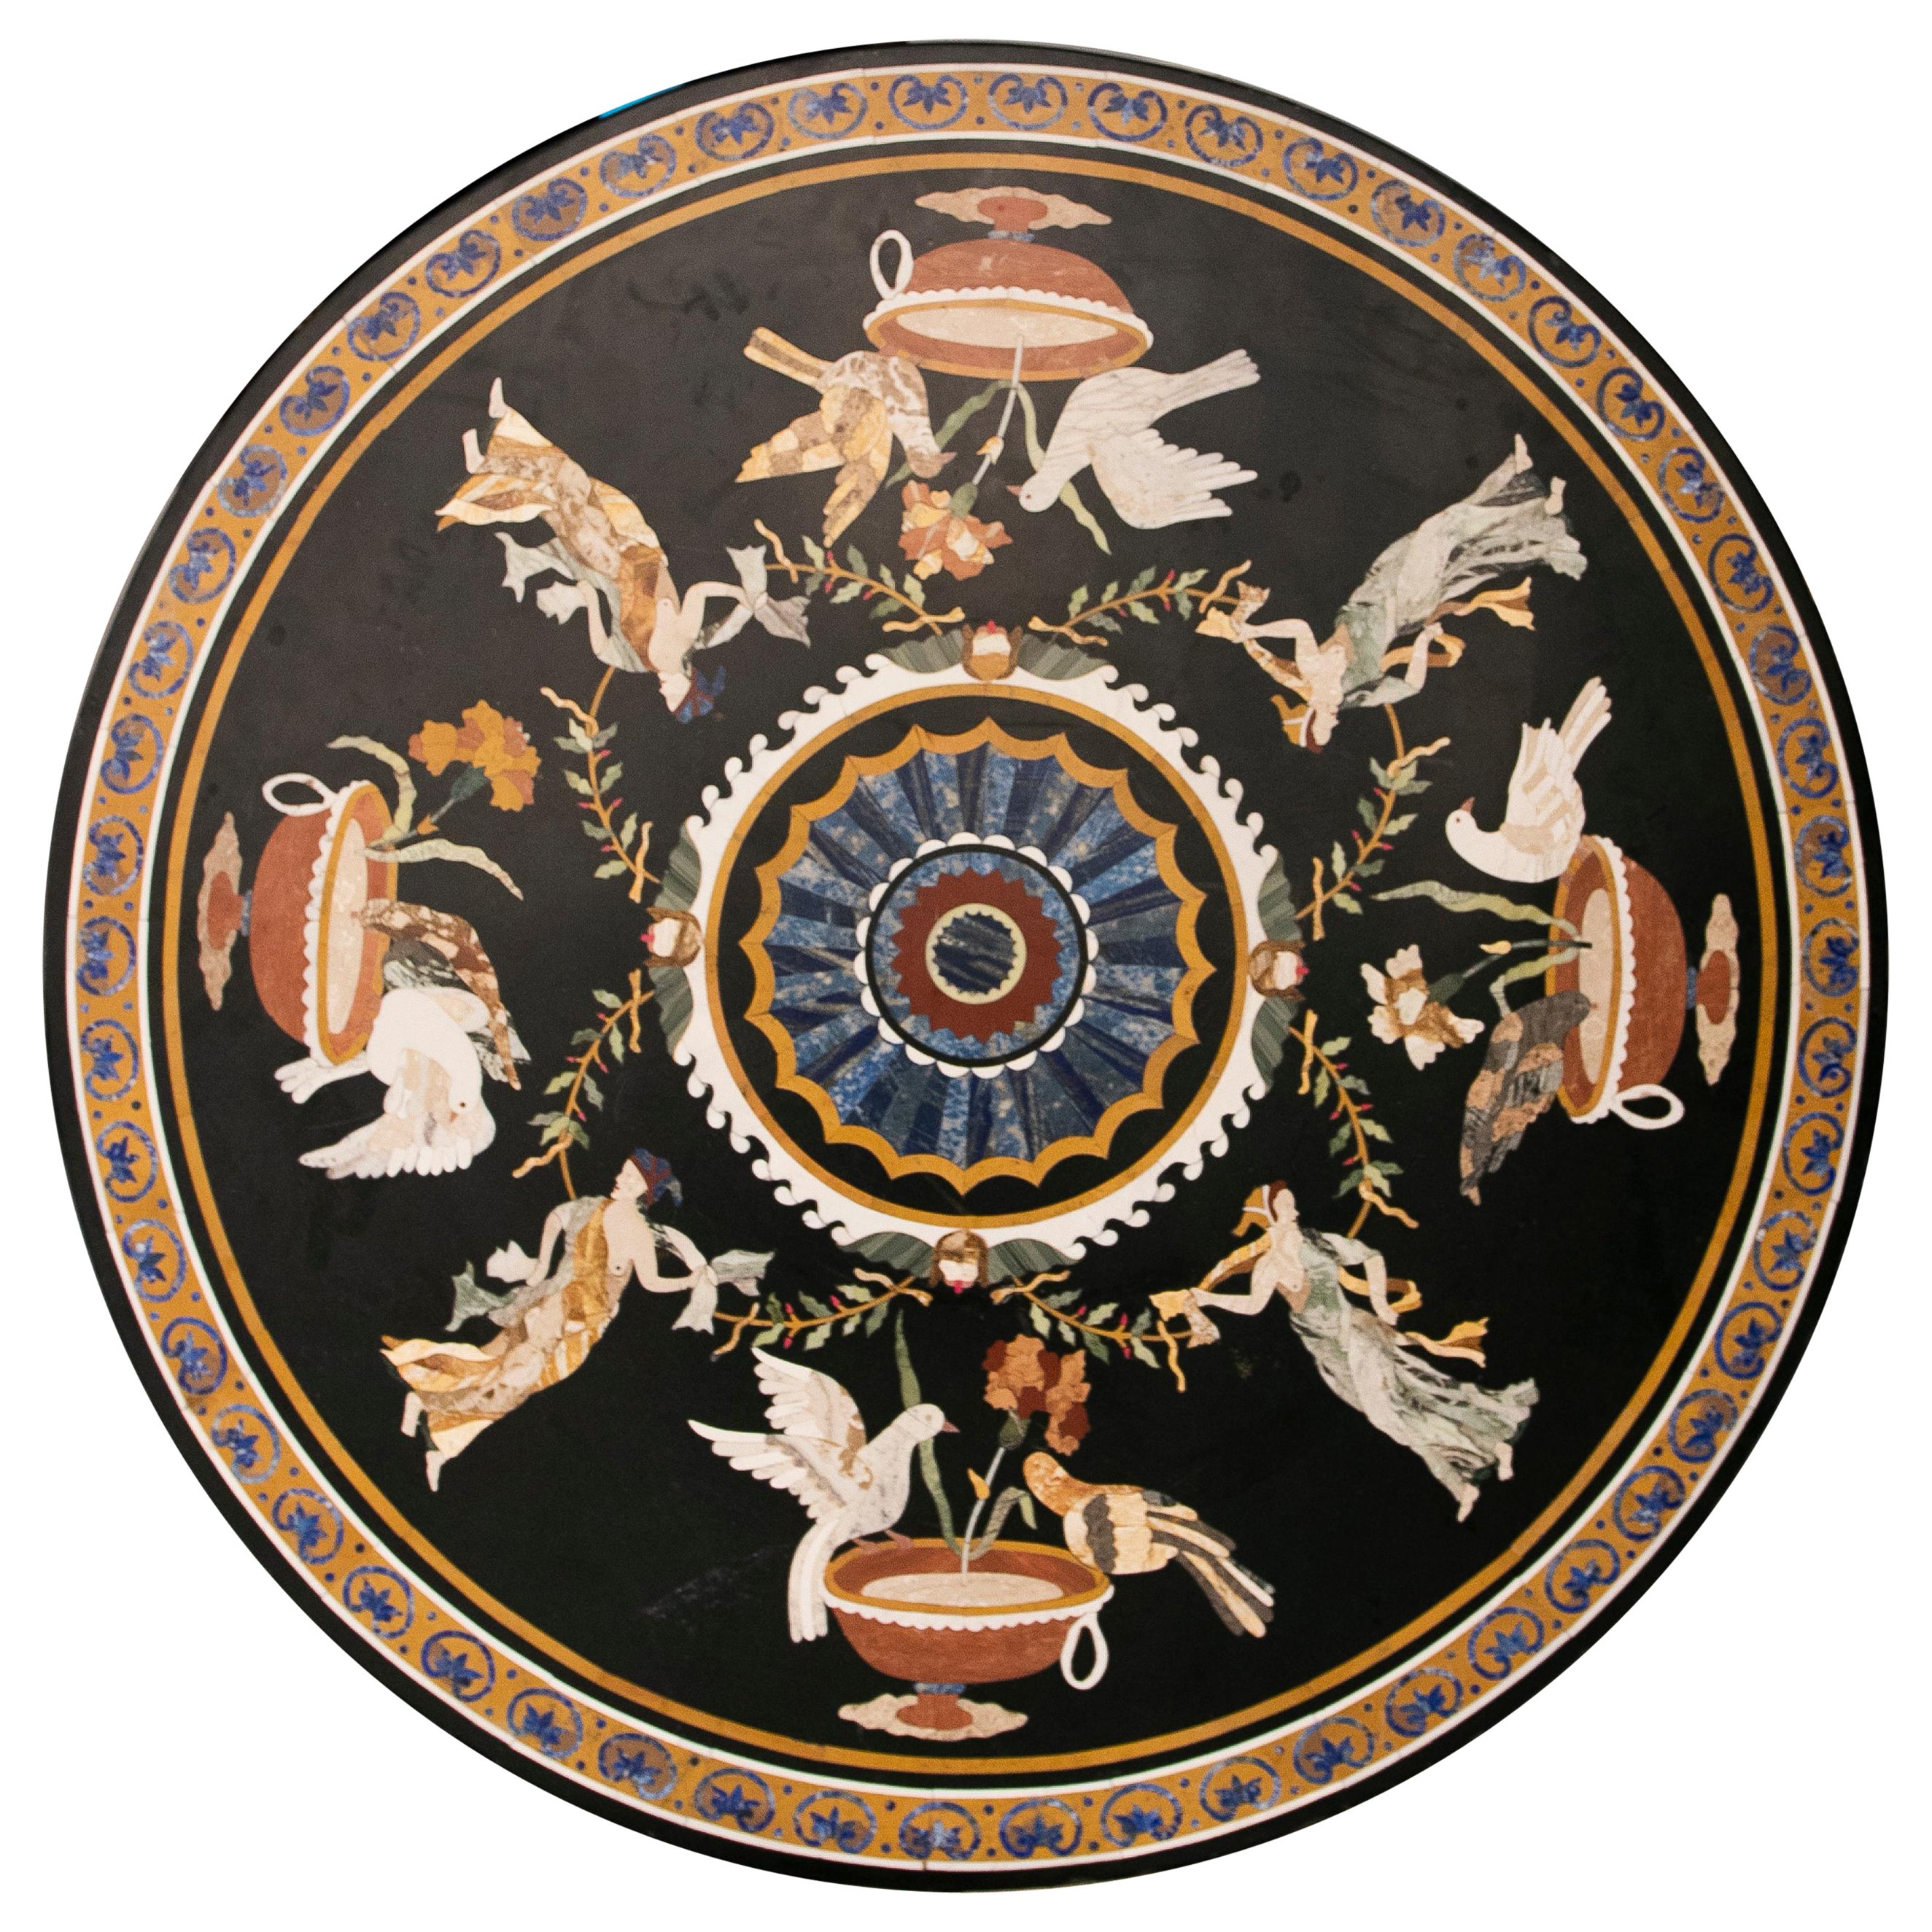 Circular Marble Table Inlaid with Hard Stones of Greek Scenes